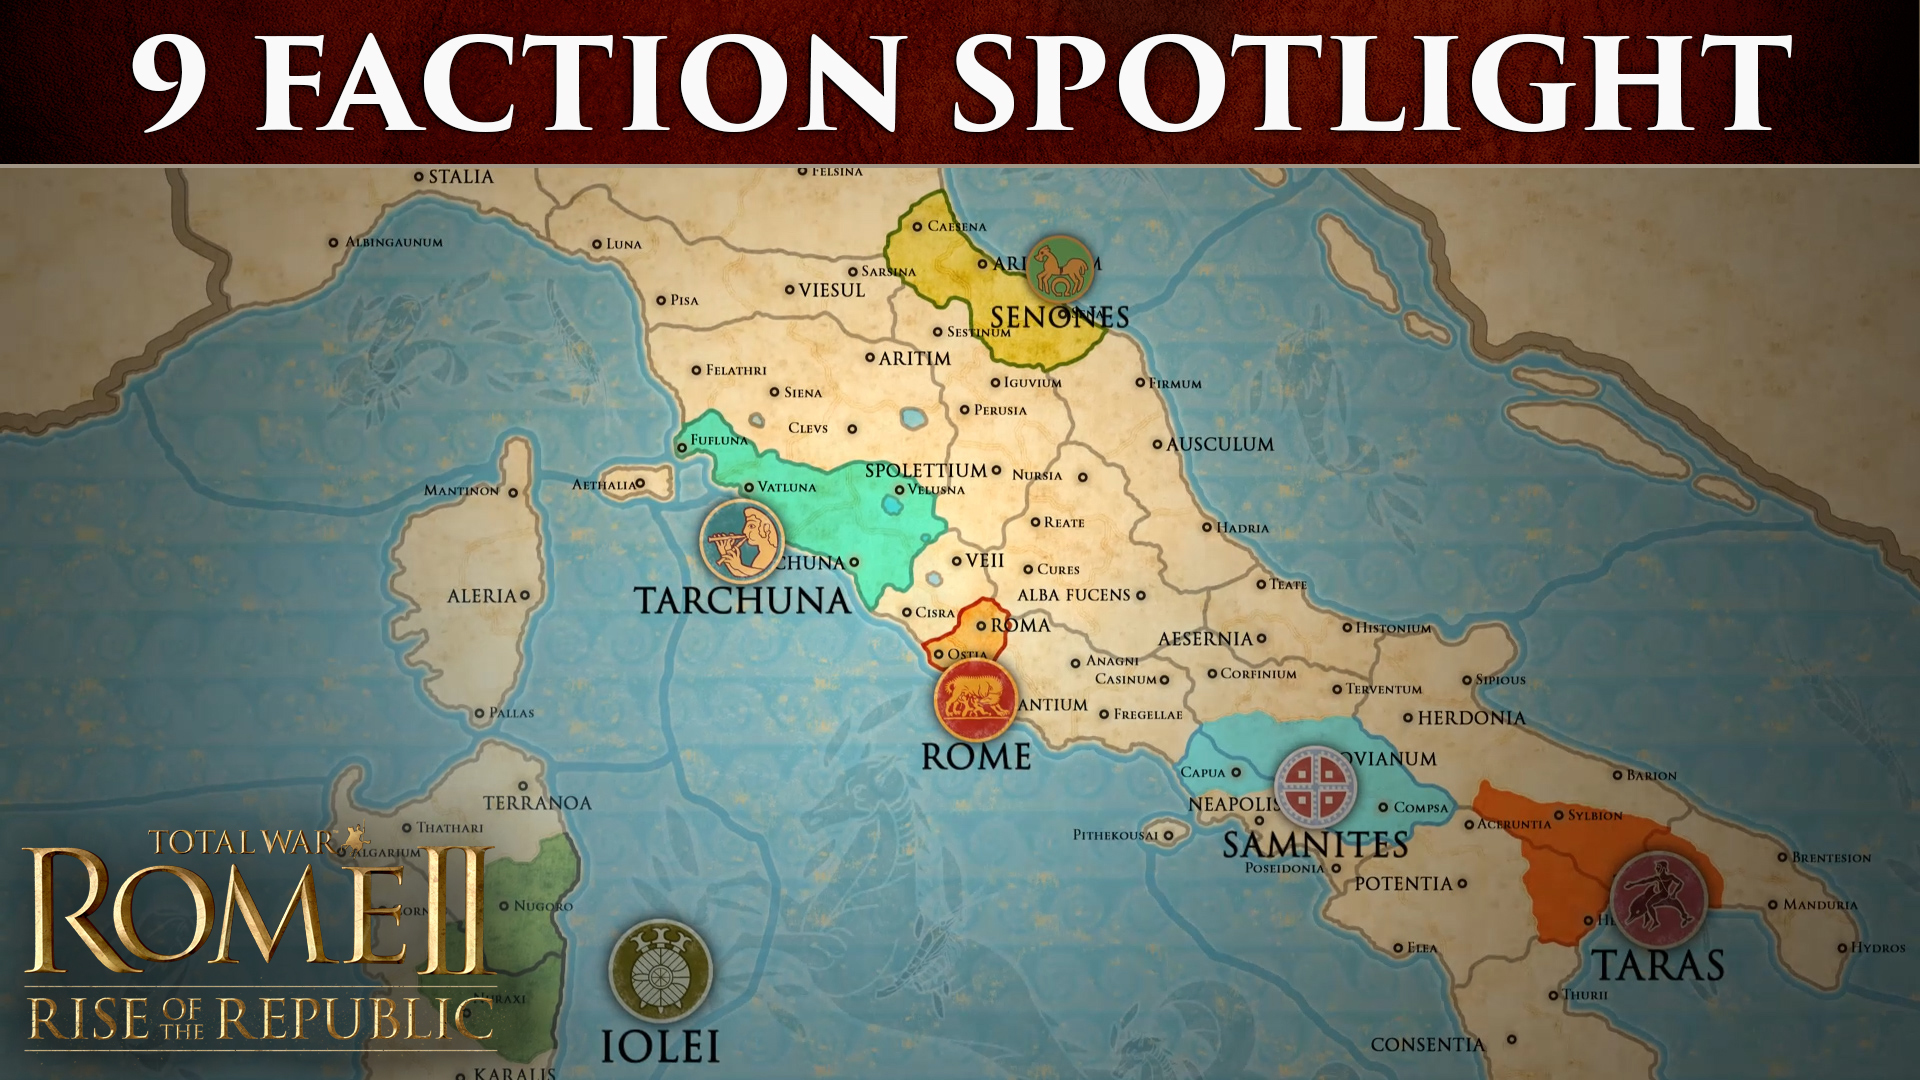 total war rome 2 empire divided factions